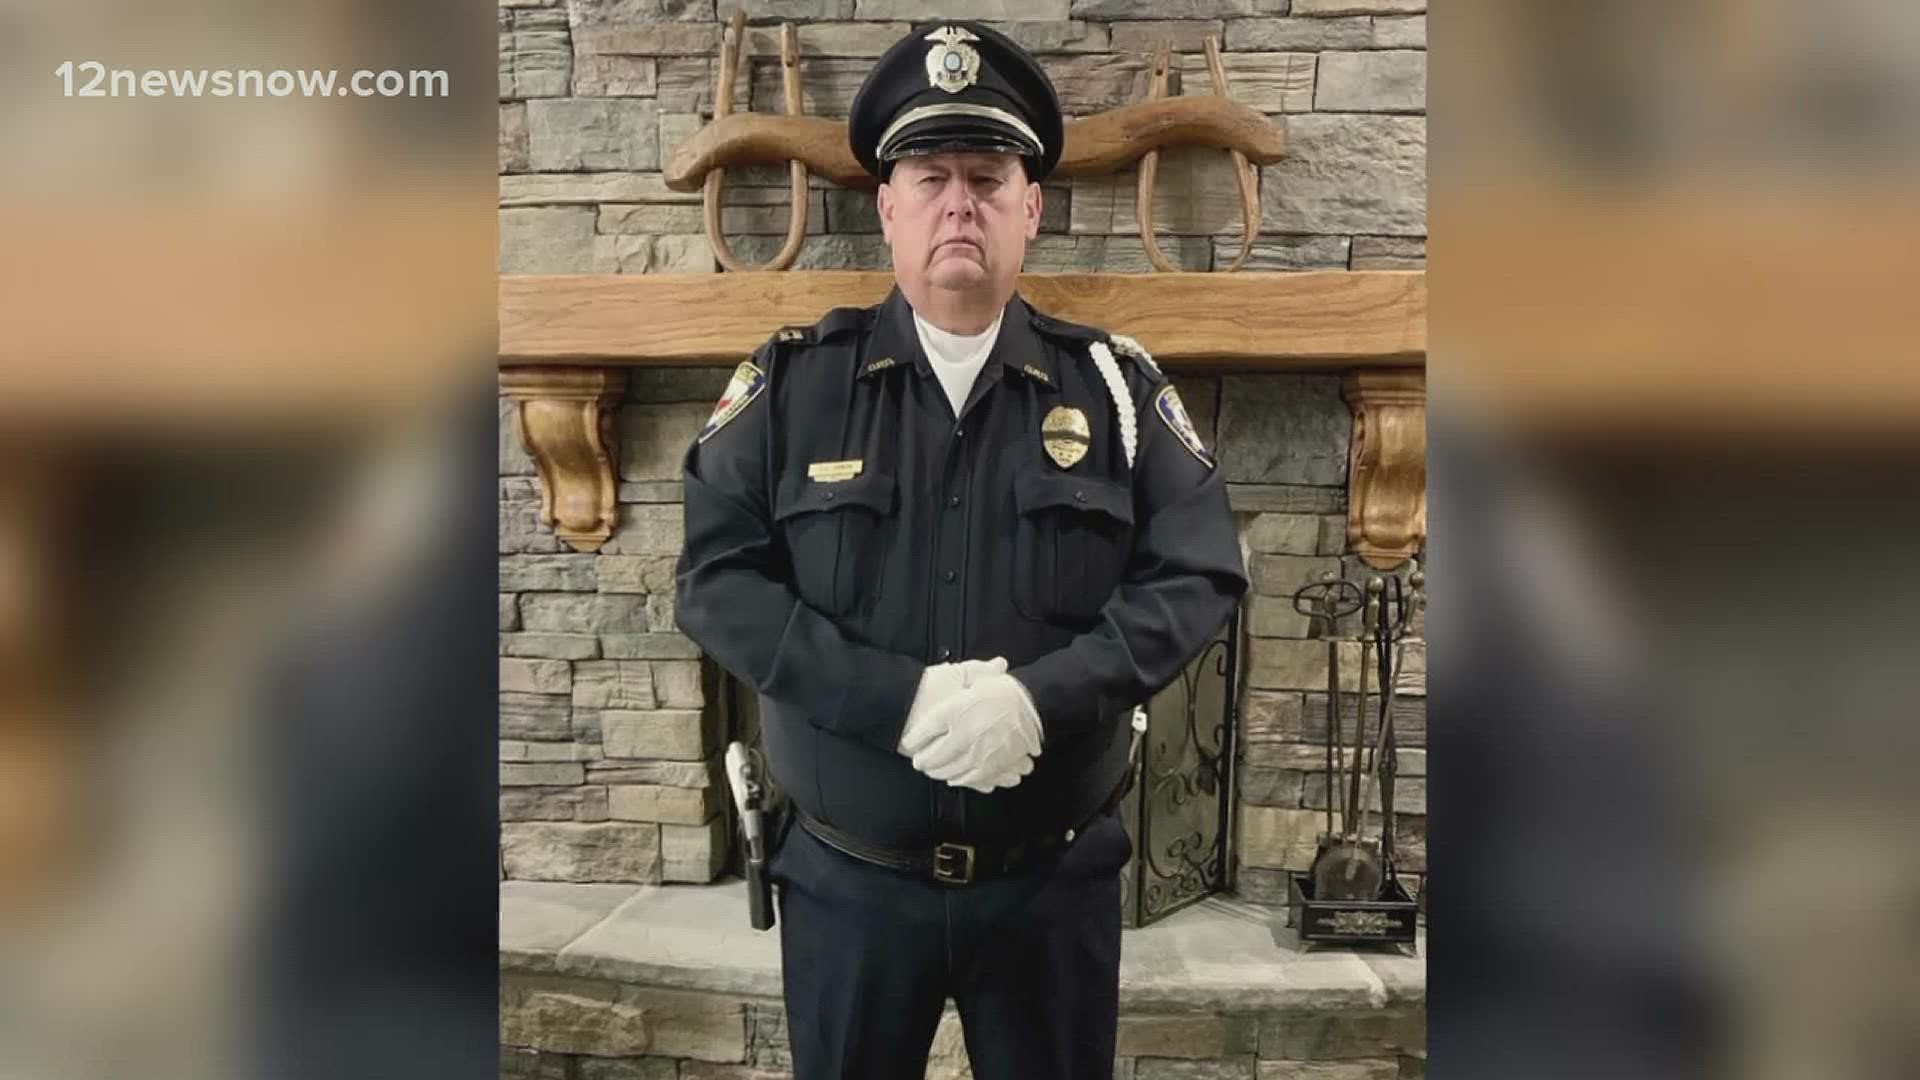 A beloved member of the Orange Police Department said through the memorable ups and heartbreaking downs, he has enjoyed serving his community.